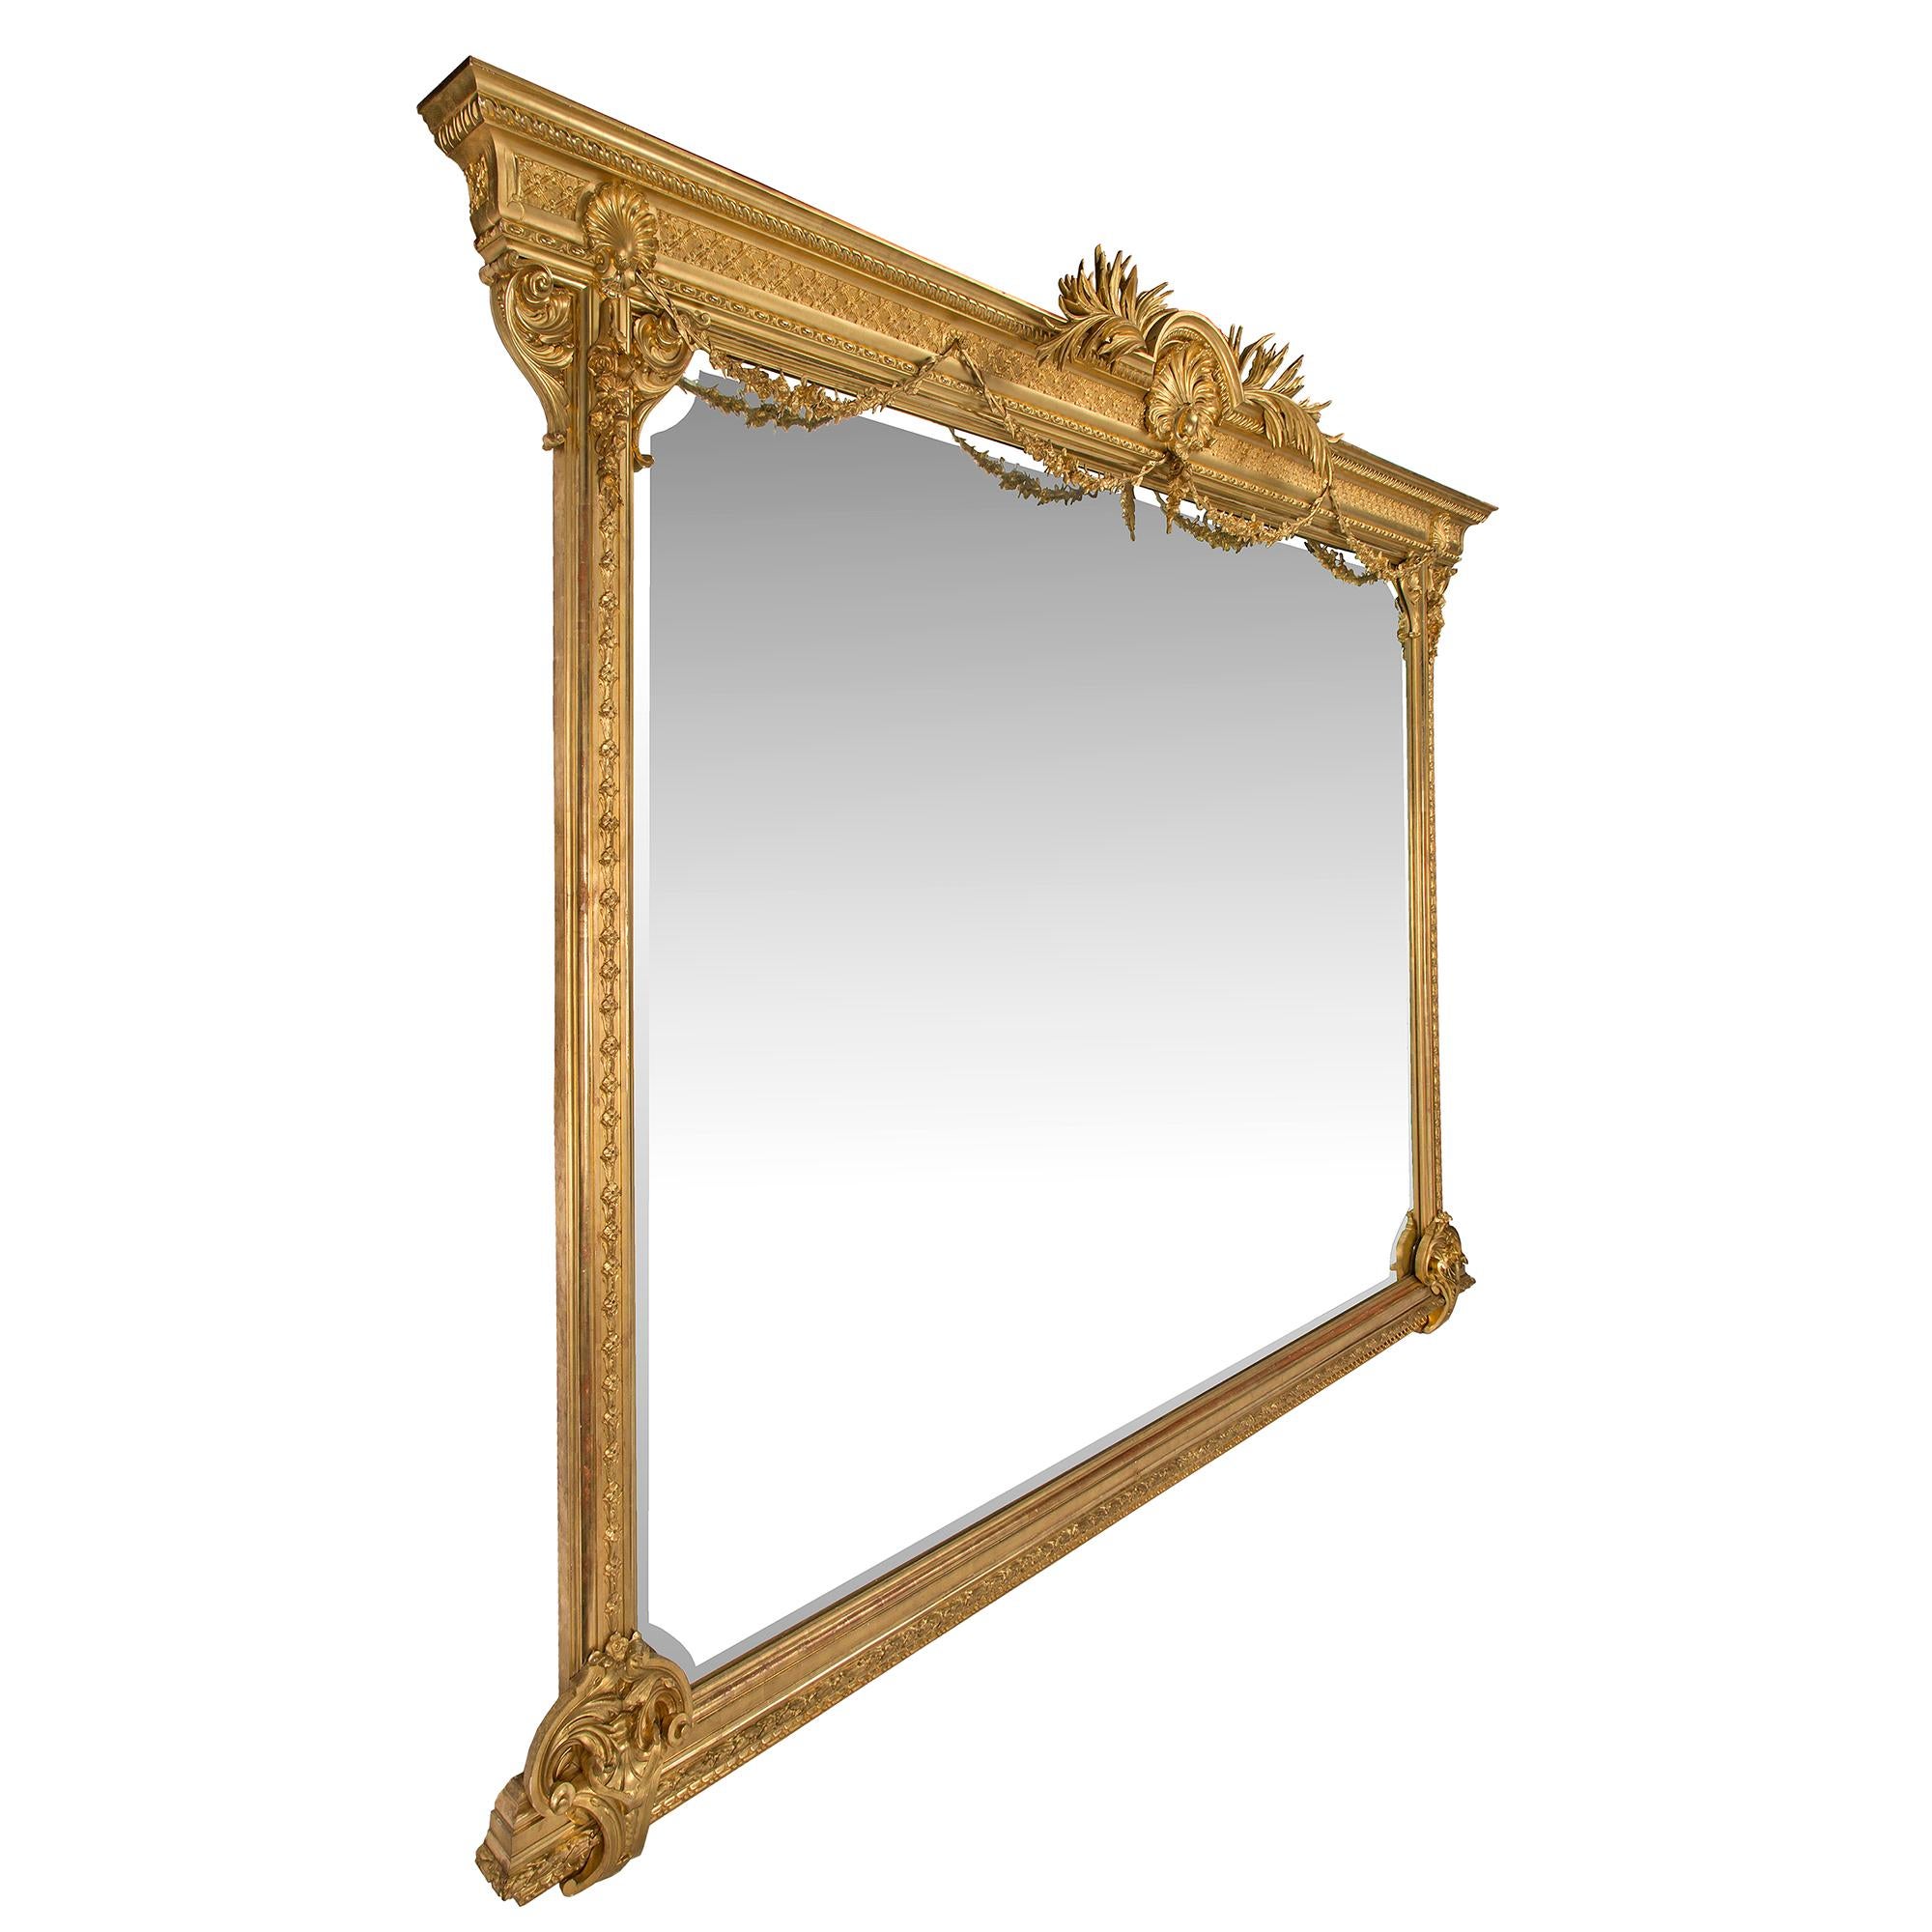 A monumental and extremely rare pair of Italian 19th century Louis XVI st. giltwood mirrors. The beveled mirrors are raised on a straight finely carved base accented with scrolls and acanthus leaves at each side. At the very impressive top crowns